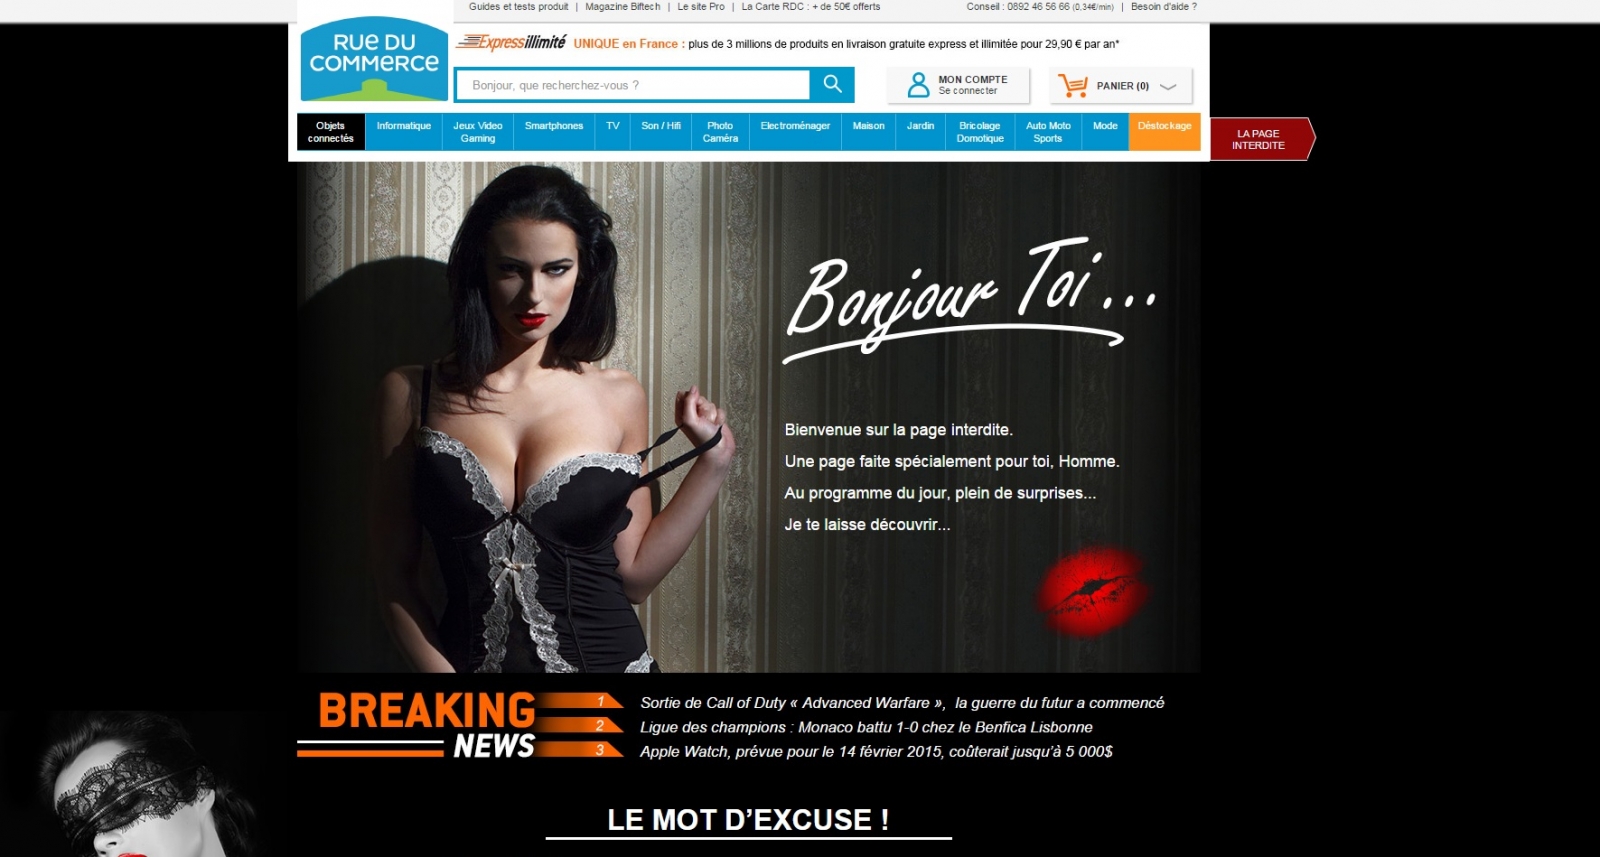 Rue du Commerce French E-Commerce Company Bans Women in Sexist Ad Campaign